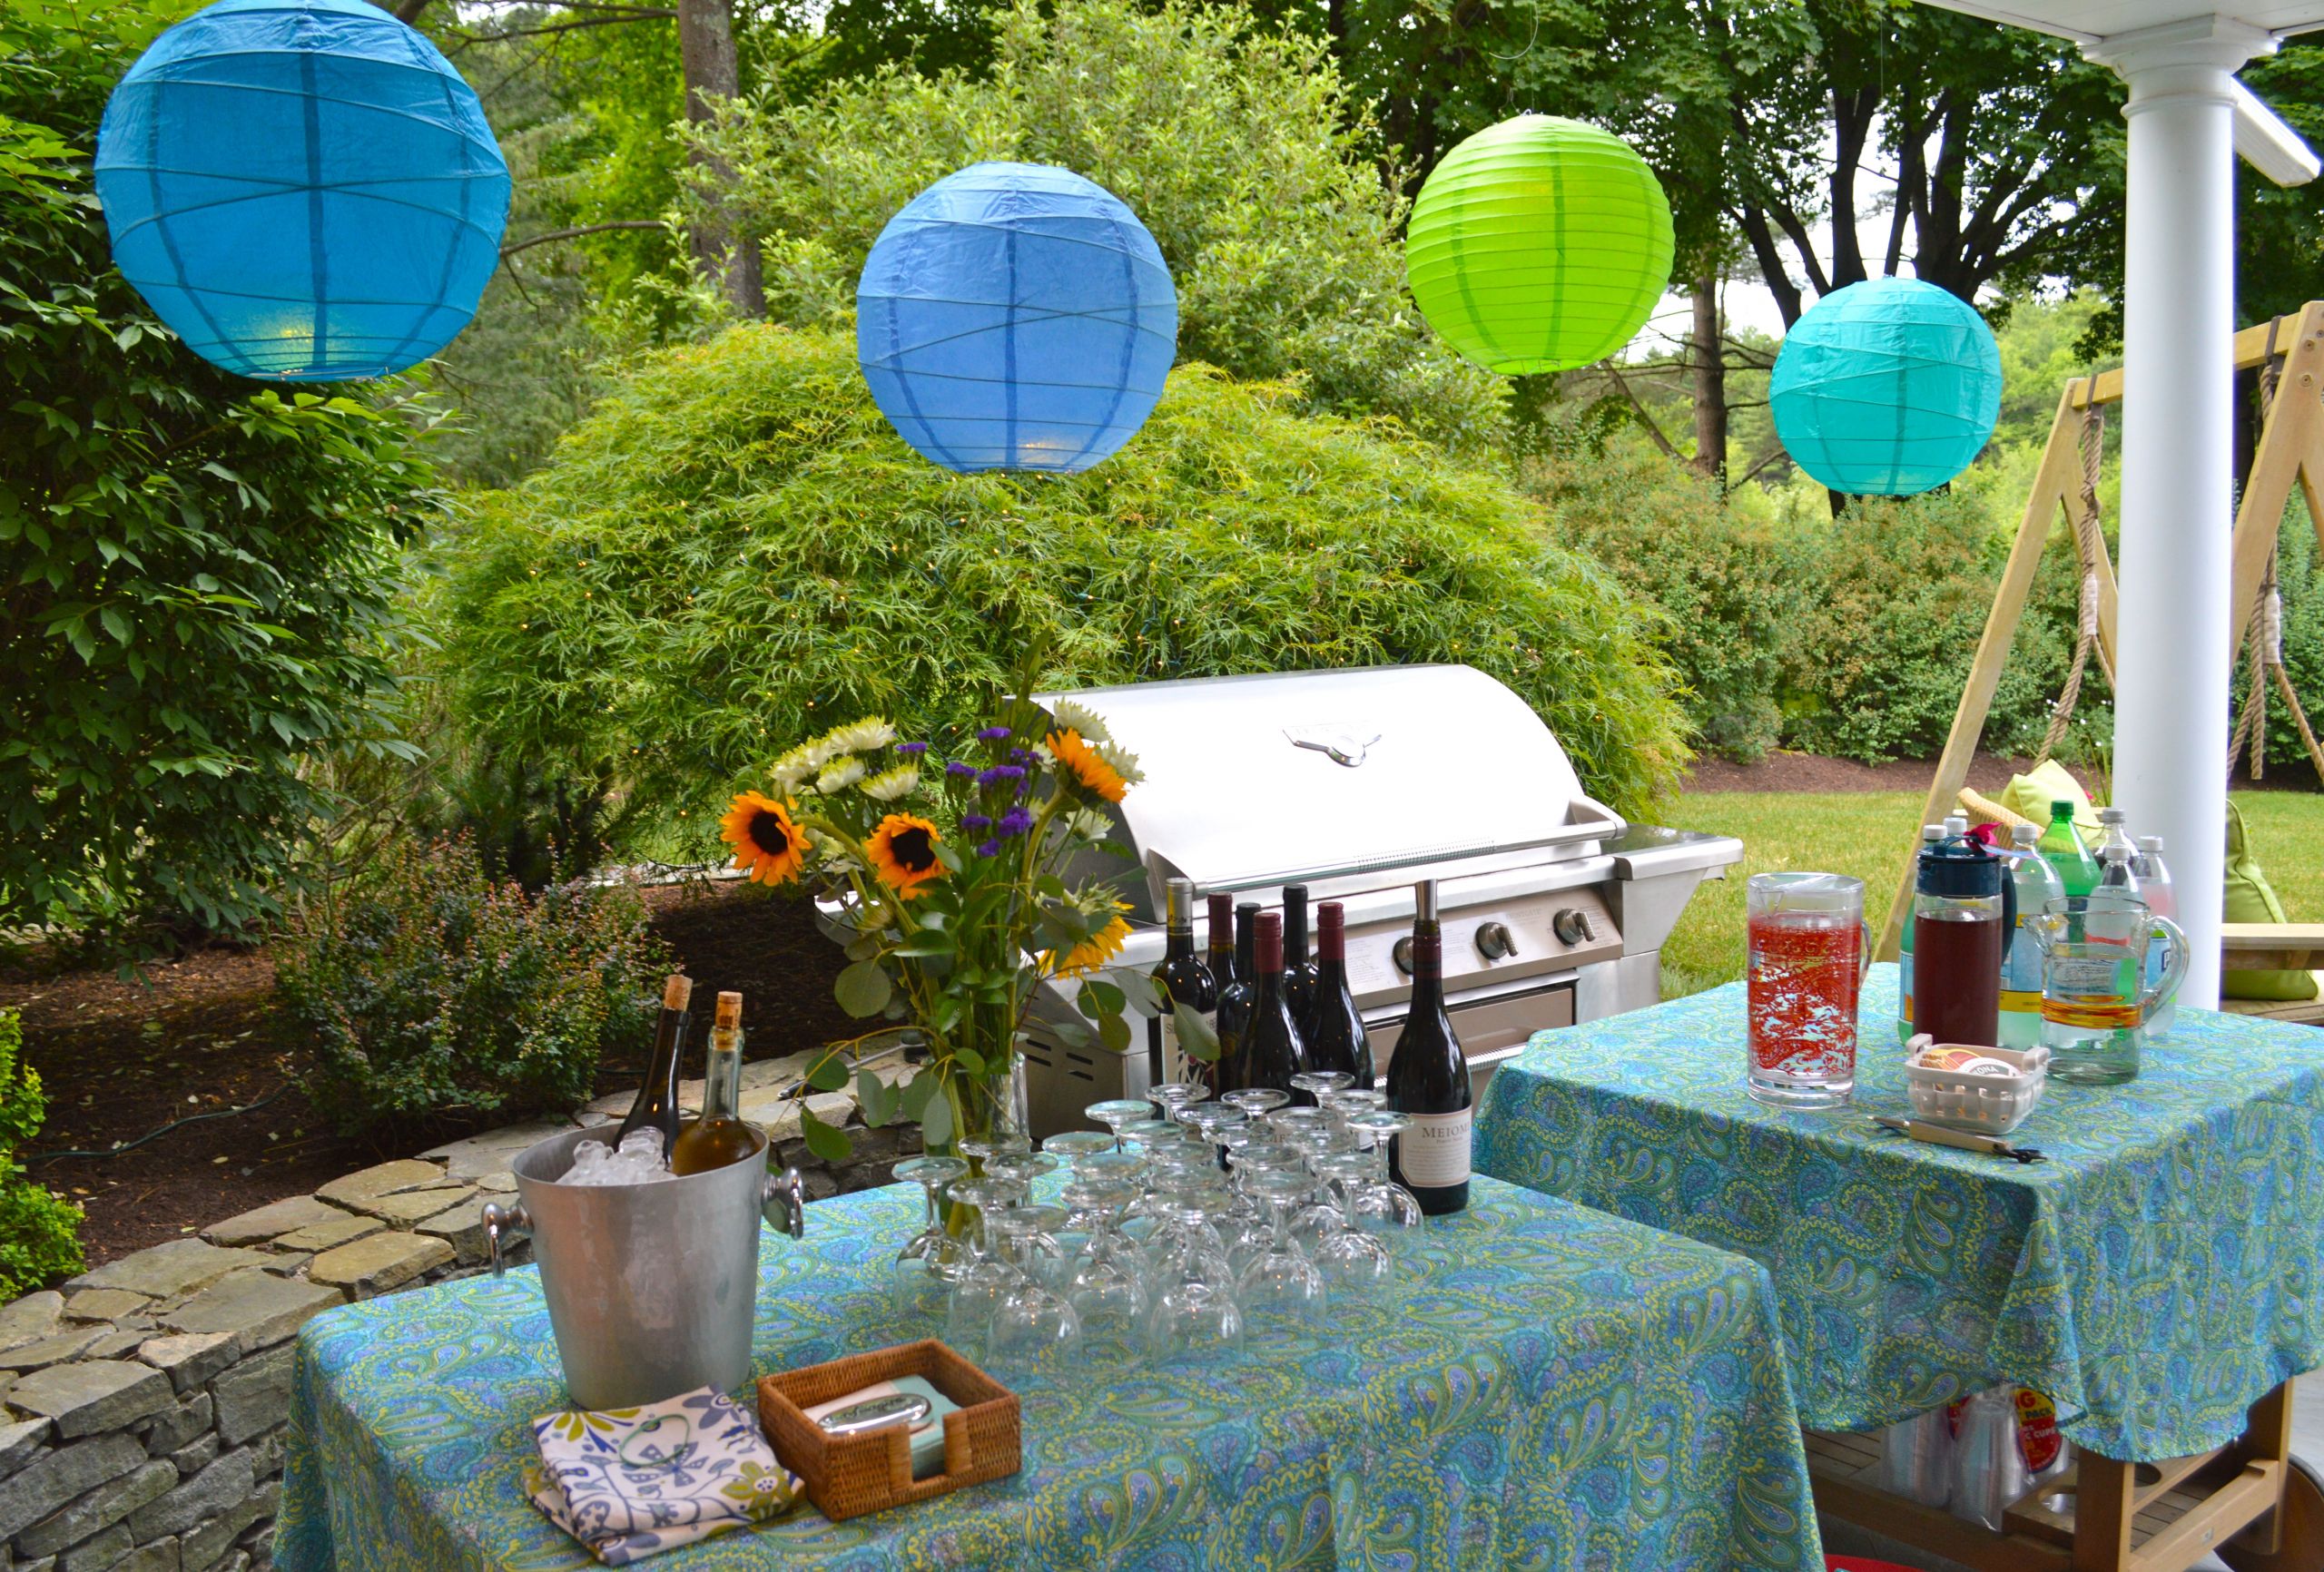 Summer Solstice Party Ideas Themes
 A Summer Solstice Party – Celebrate the long days of